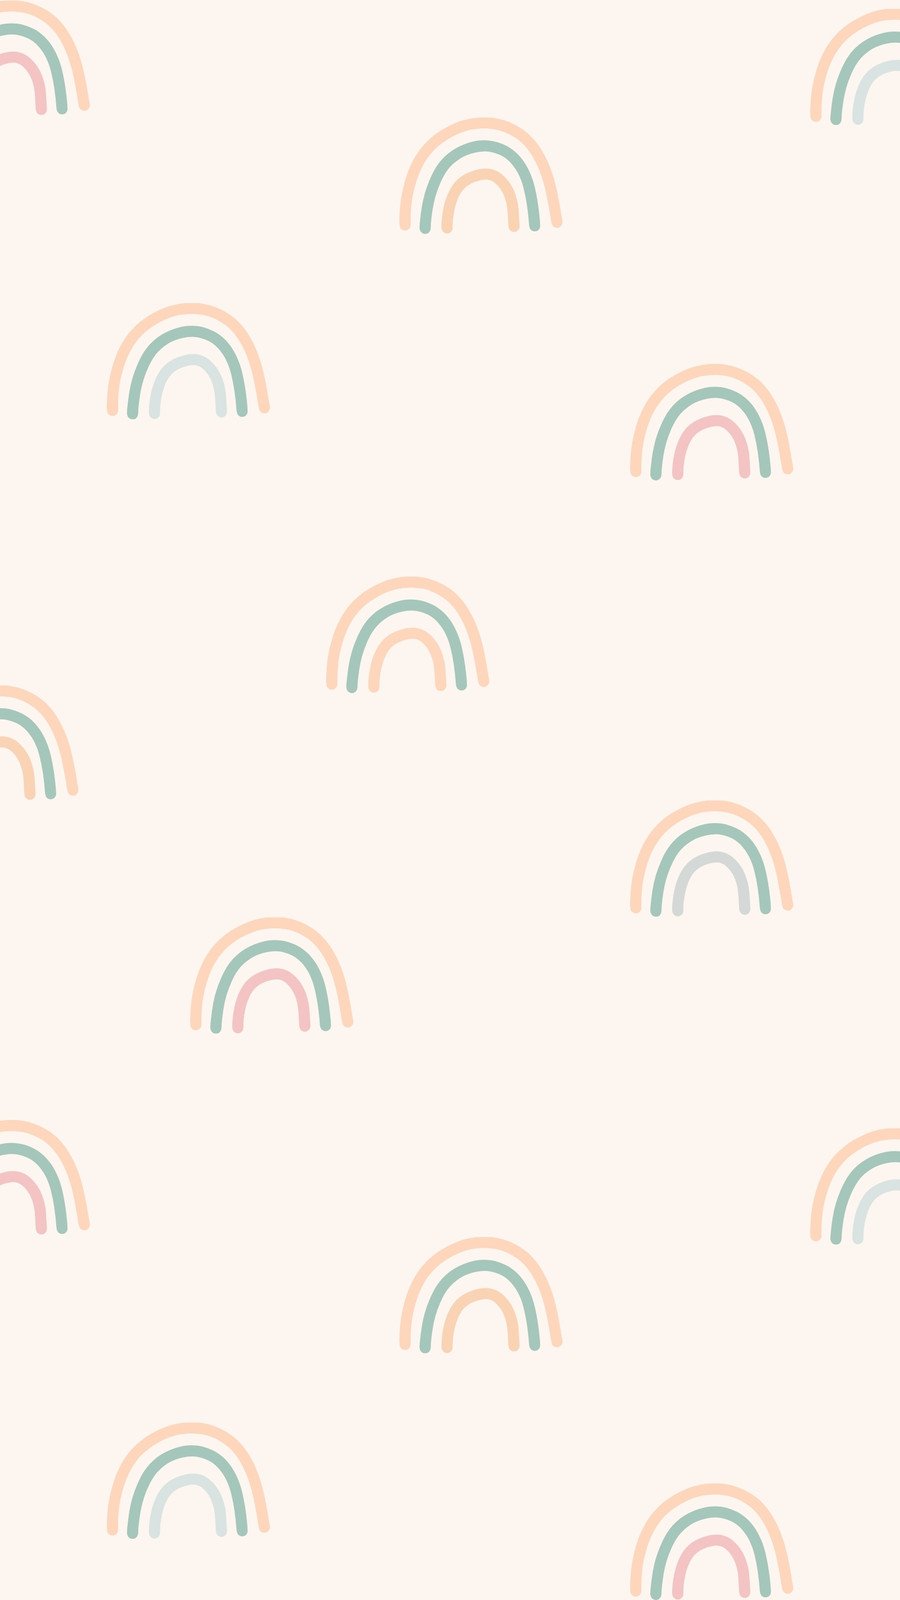 A rainbow pattern in pastel colors on a cream background - Pastel minimalist